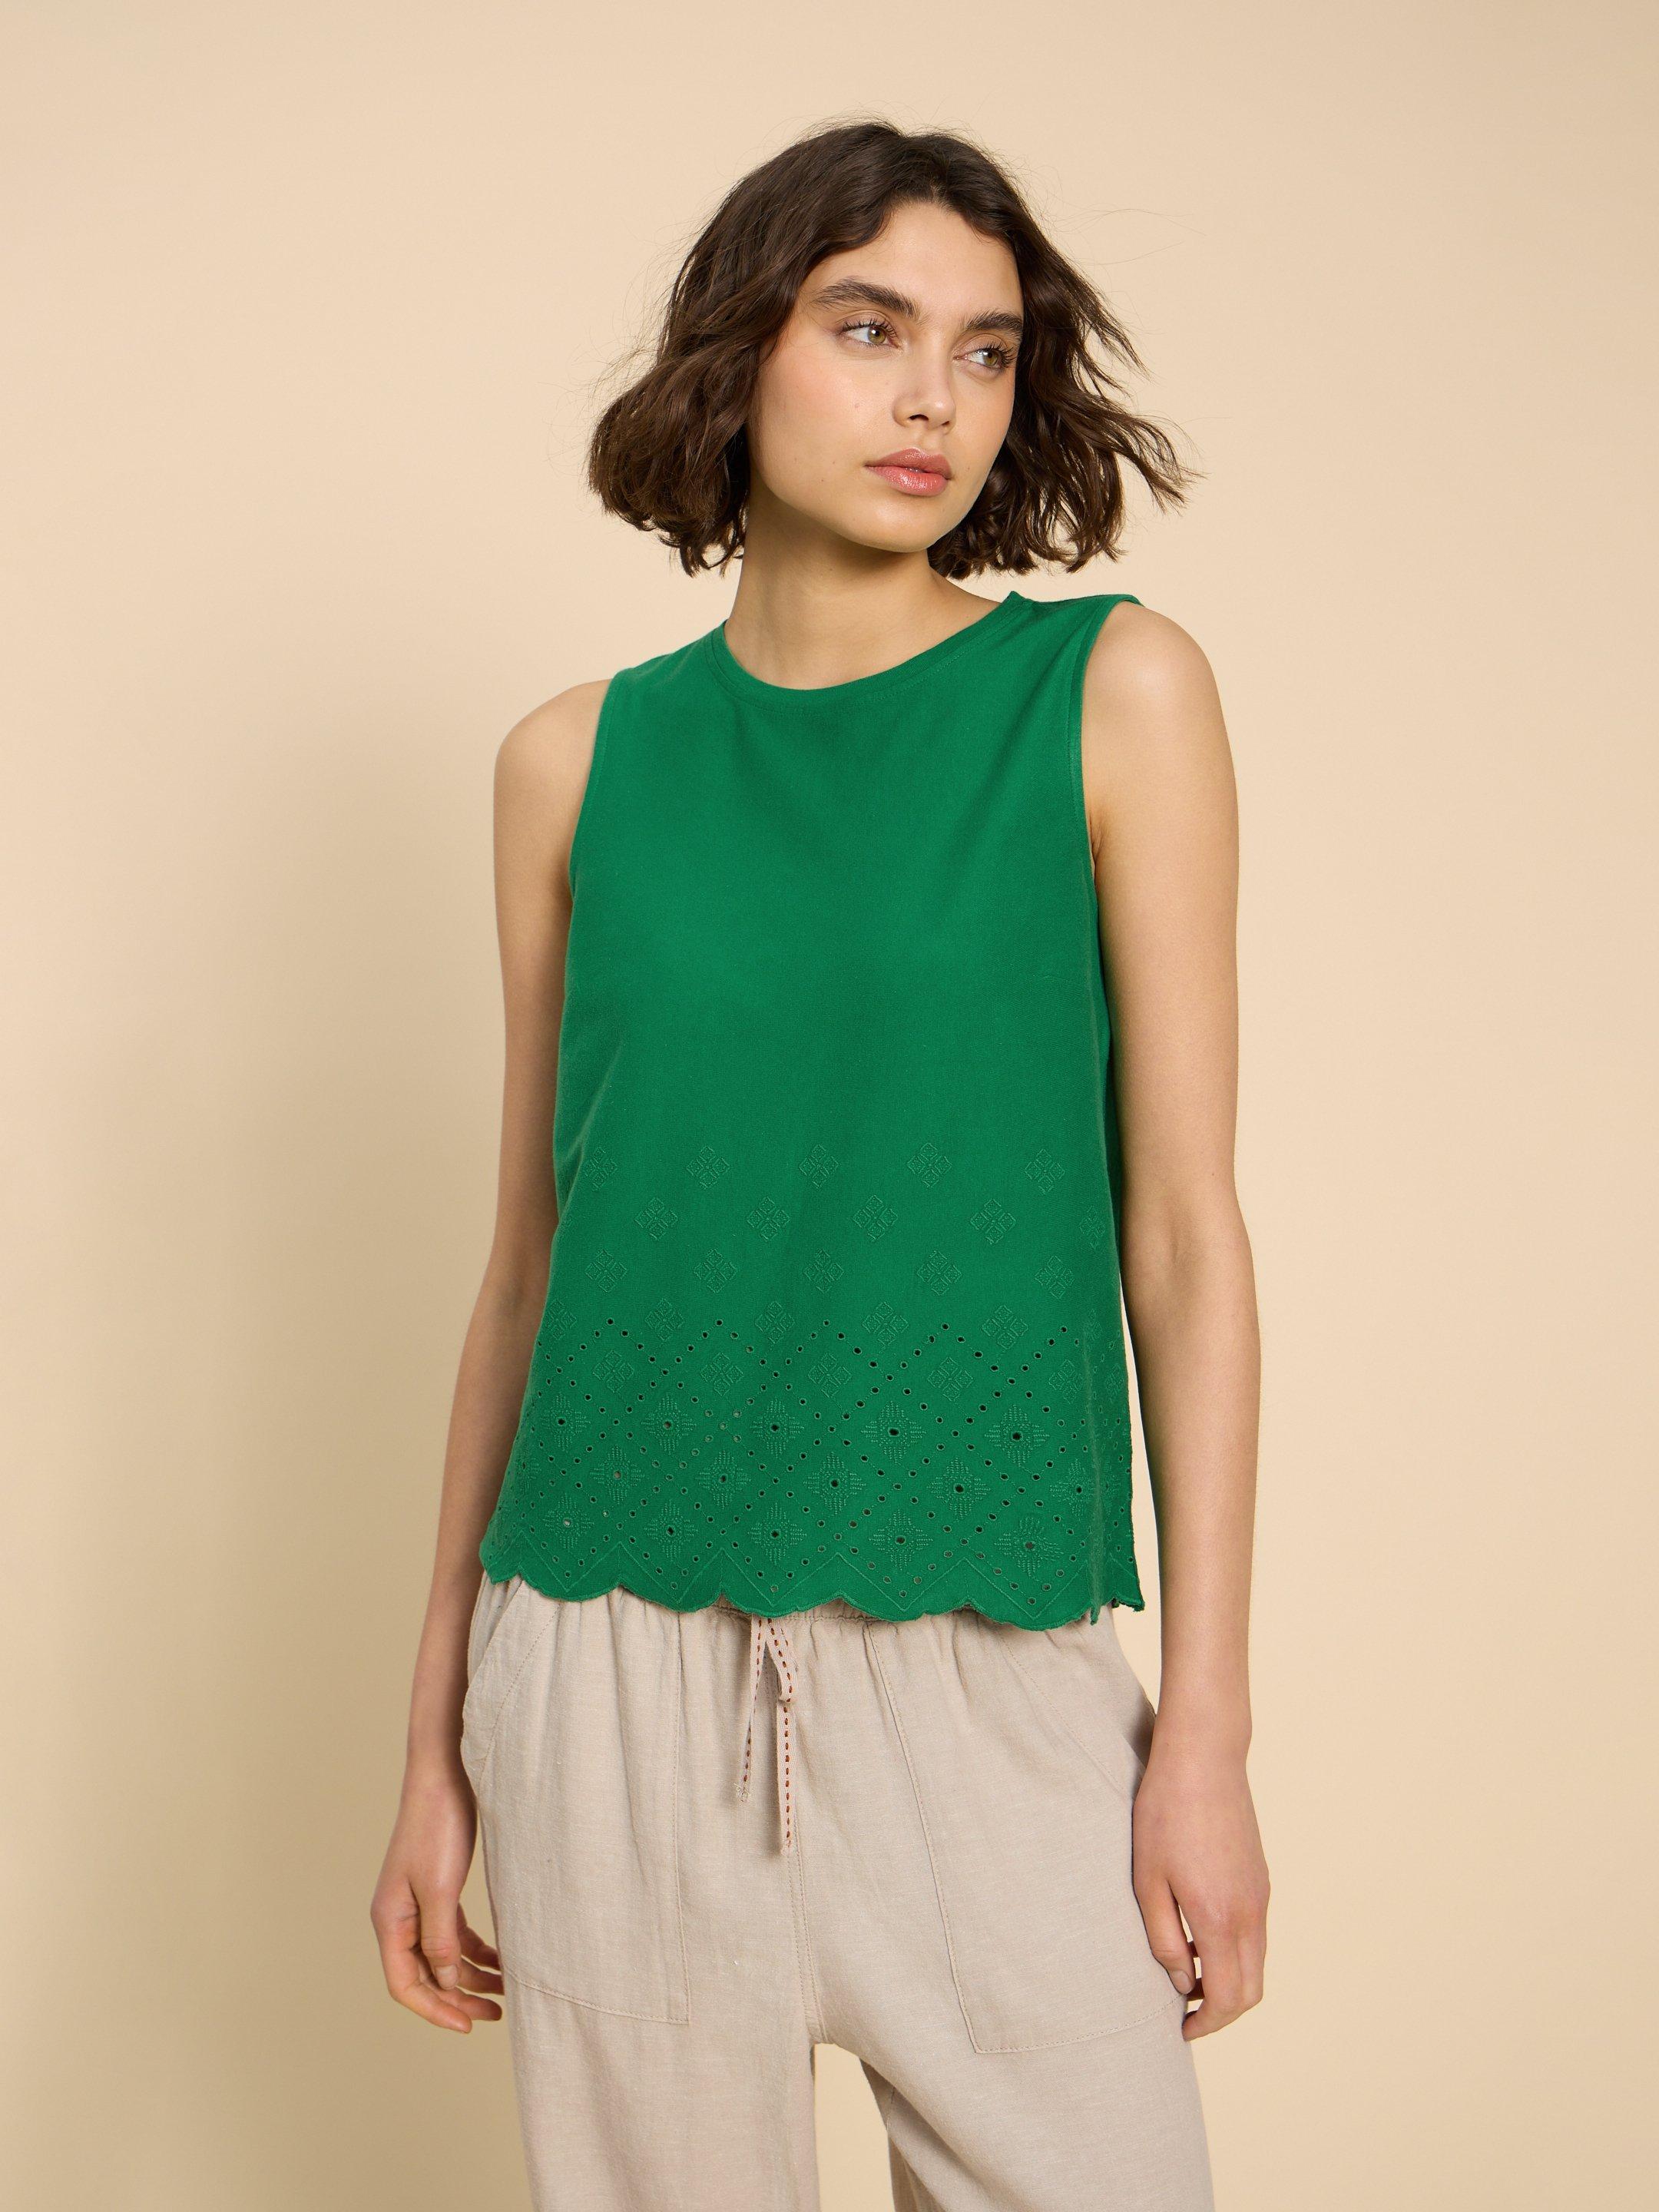 SILVIA CUT OUT VEST in BRT GREEN - MODEL FRONT